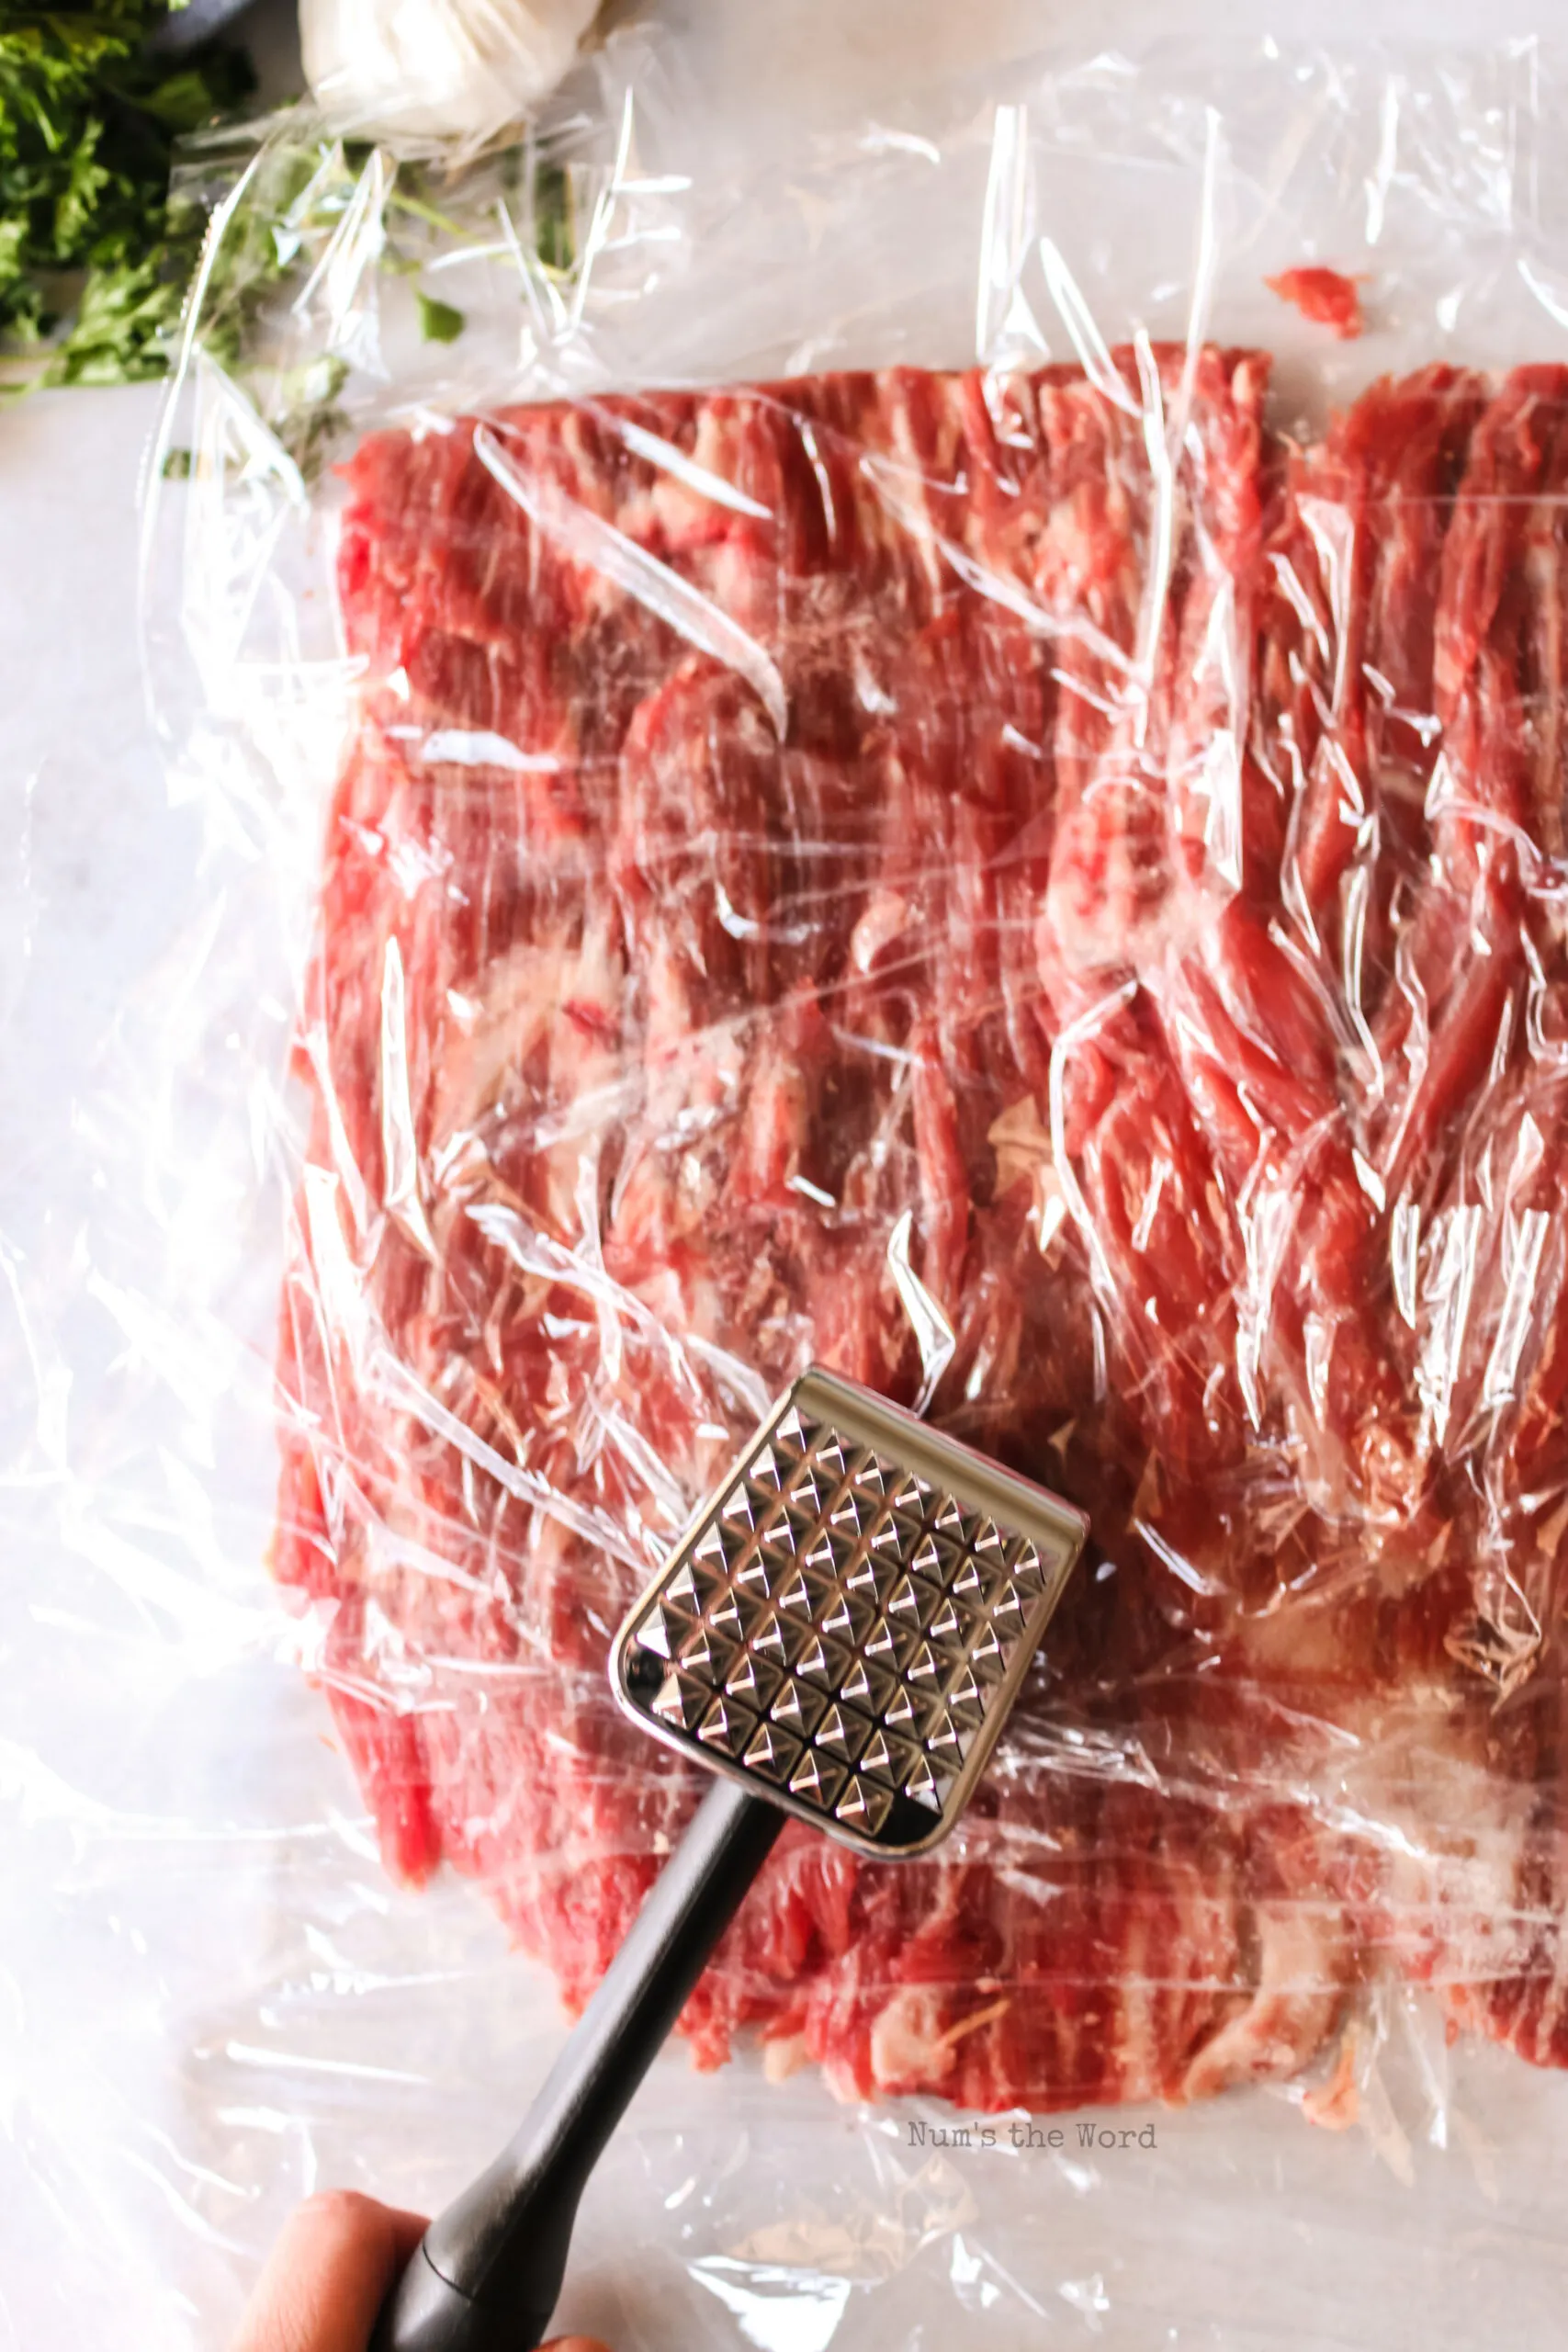 Plastic wrap laid over steak with a meat hammer pounding meat to even it out.